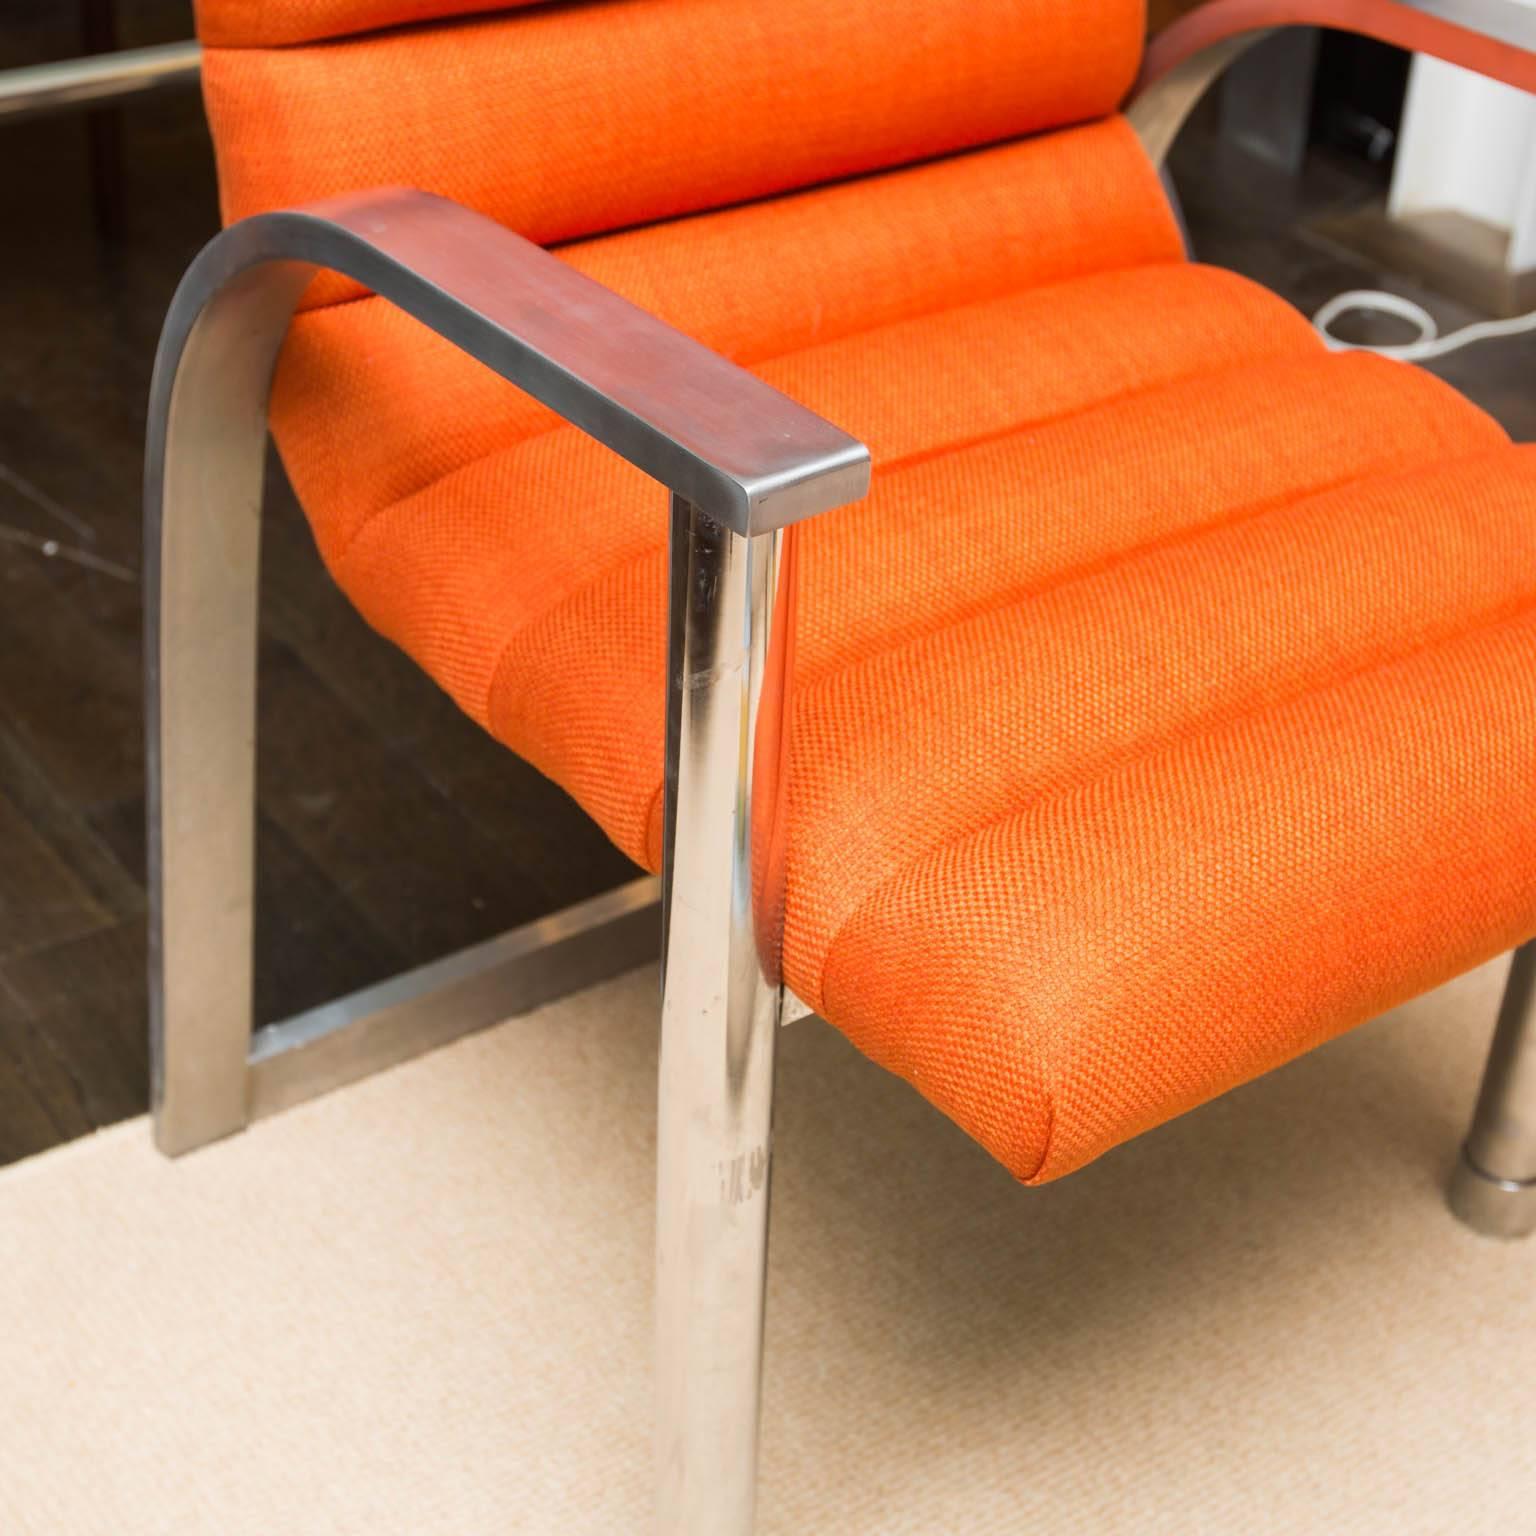 Just reupholstered in orange linen, this is a nicely constructed armchair made of heavy-gauge brushed stainless steel.